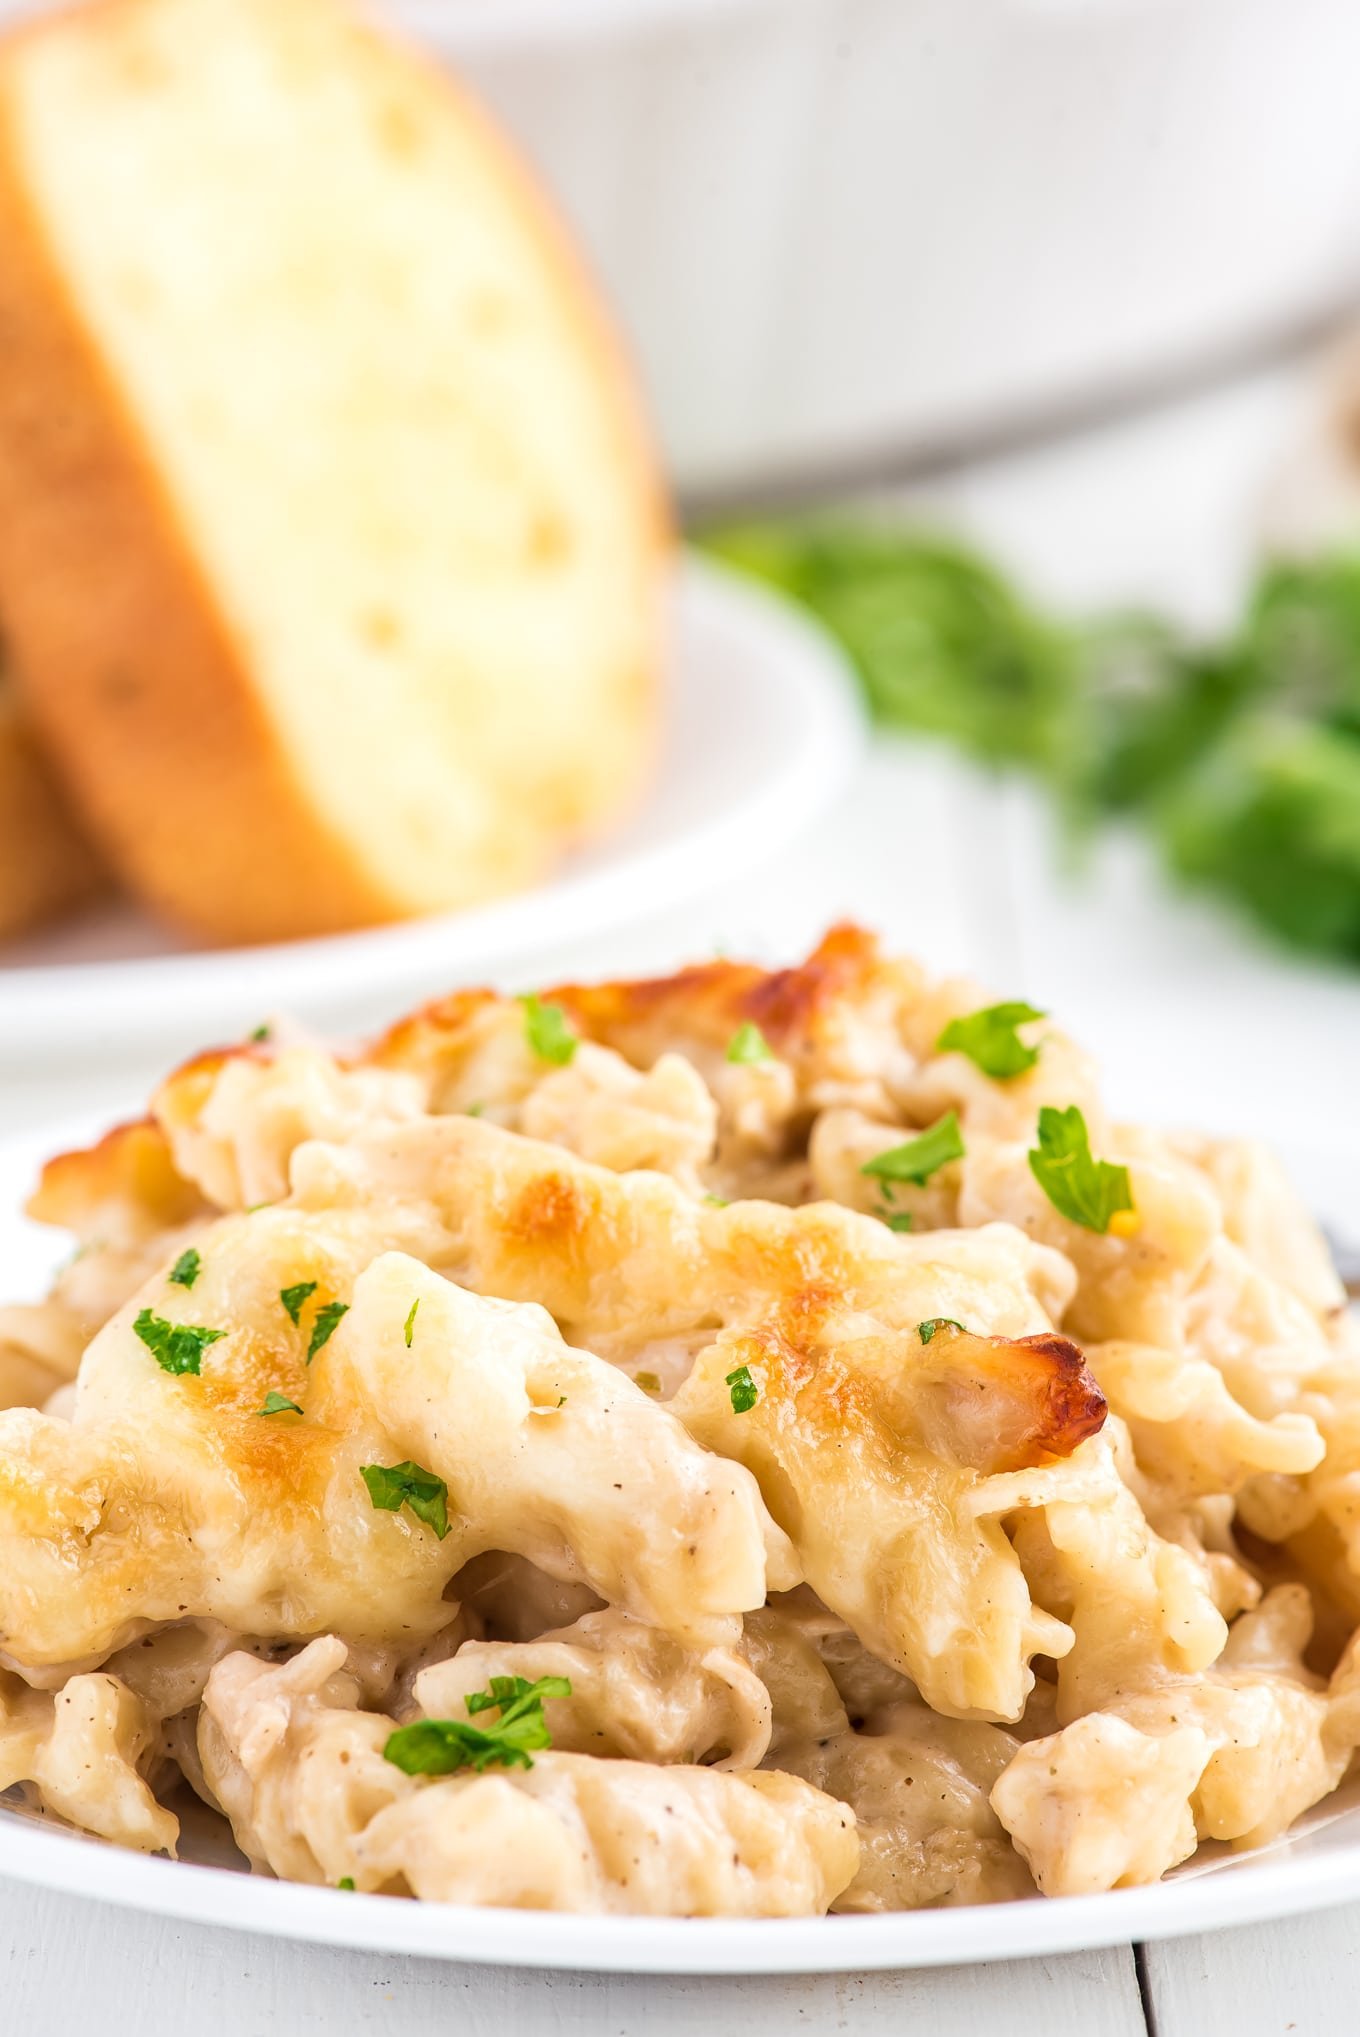 A plate of chicken alfredo pasta bake on the table with garlic bread behind it.